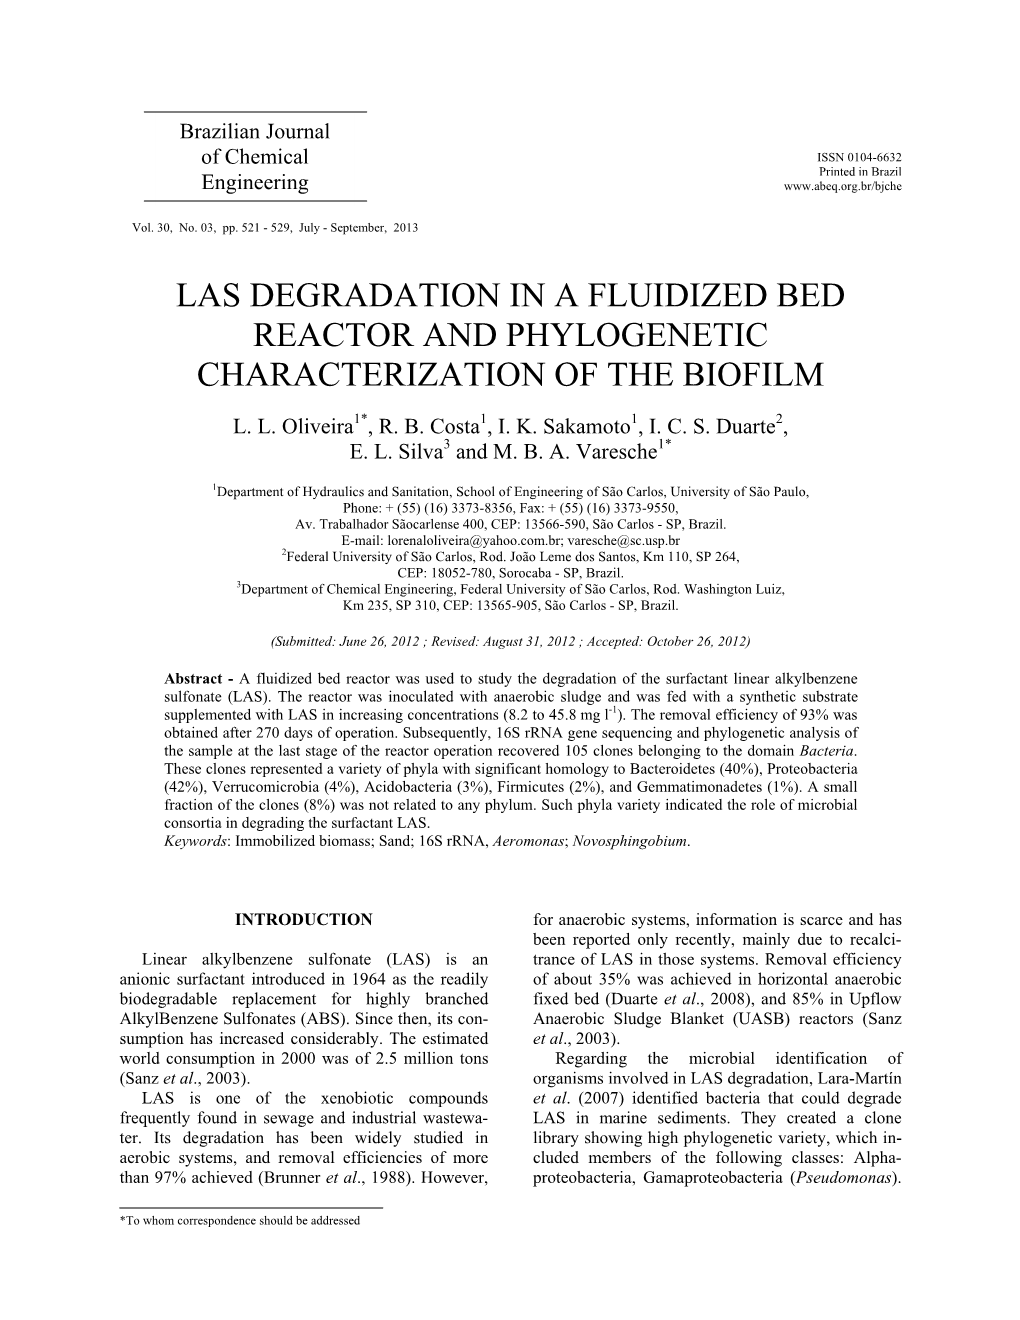 Las Degradation in a Fluidized Bed Reactor and Phylogenetic Characterization of the Biofilm